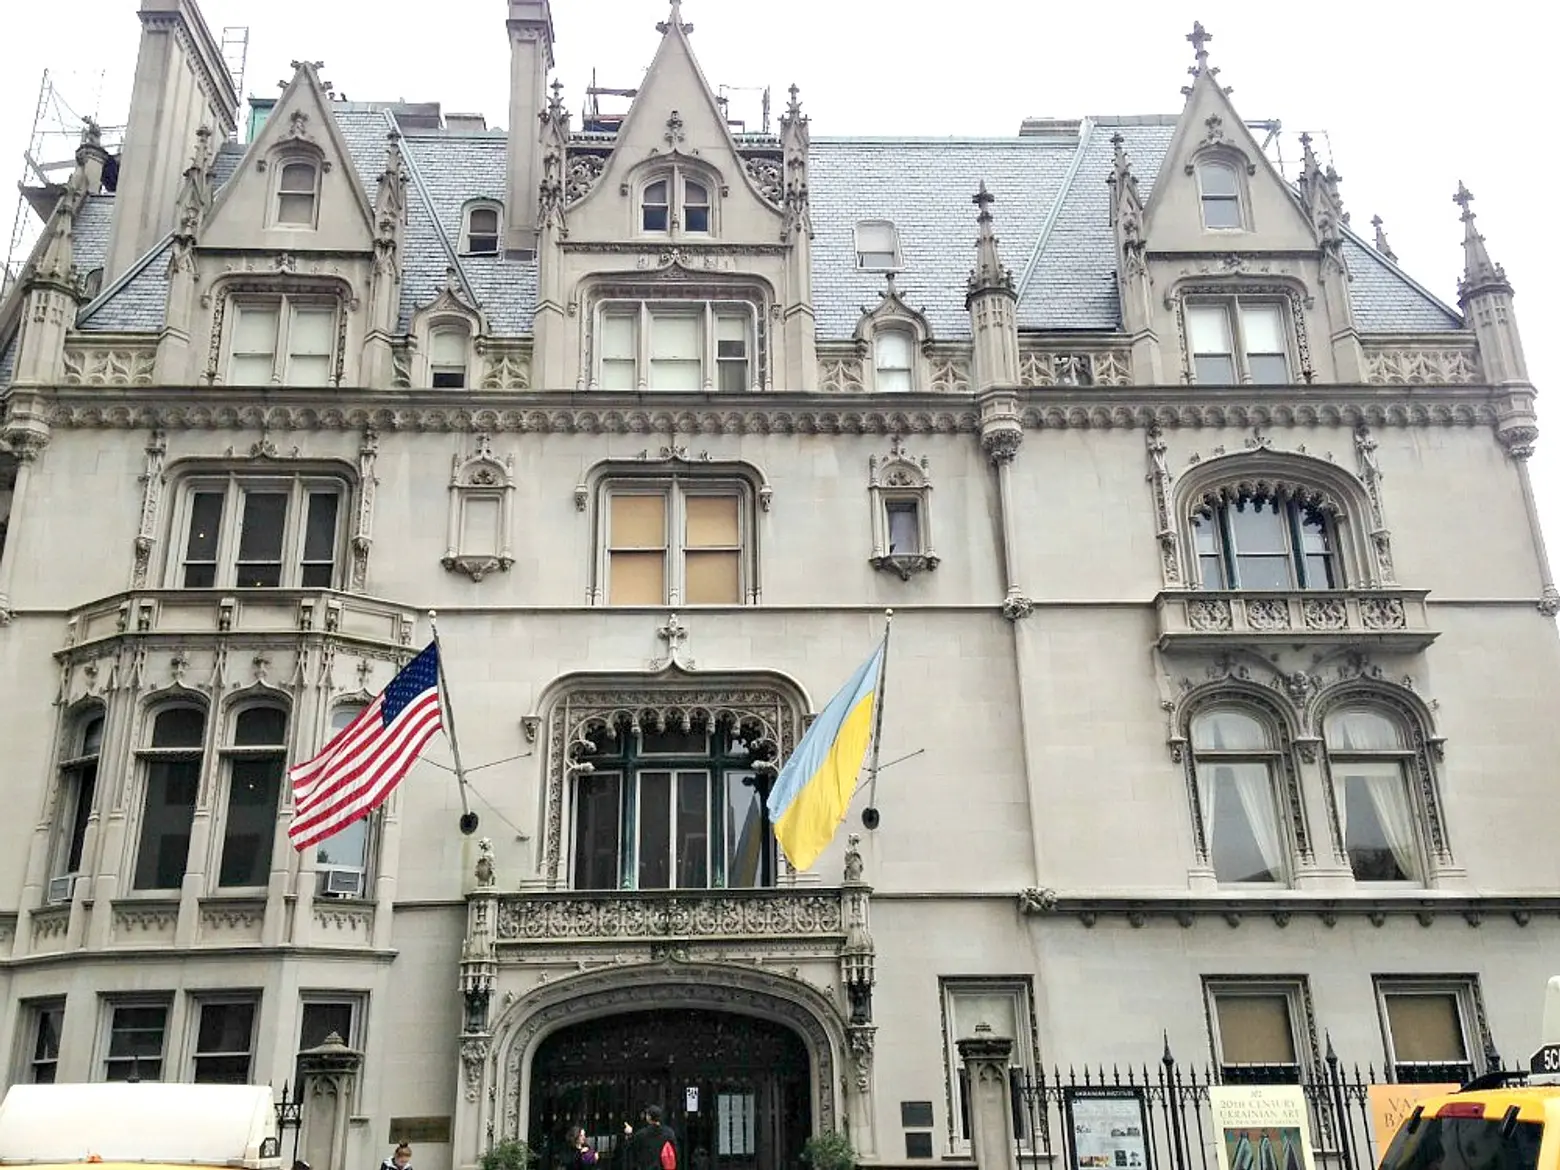 How the Fletcher-Sinclair Mansion Went from Private Home to the Ukrainian Institute of America